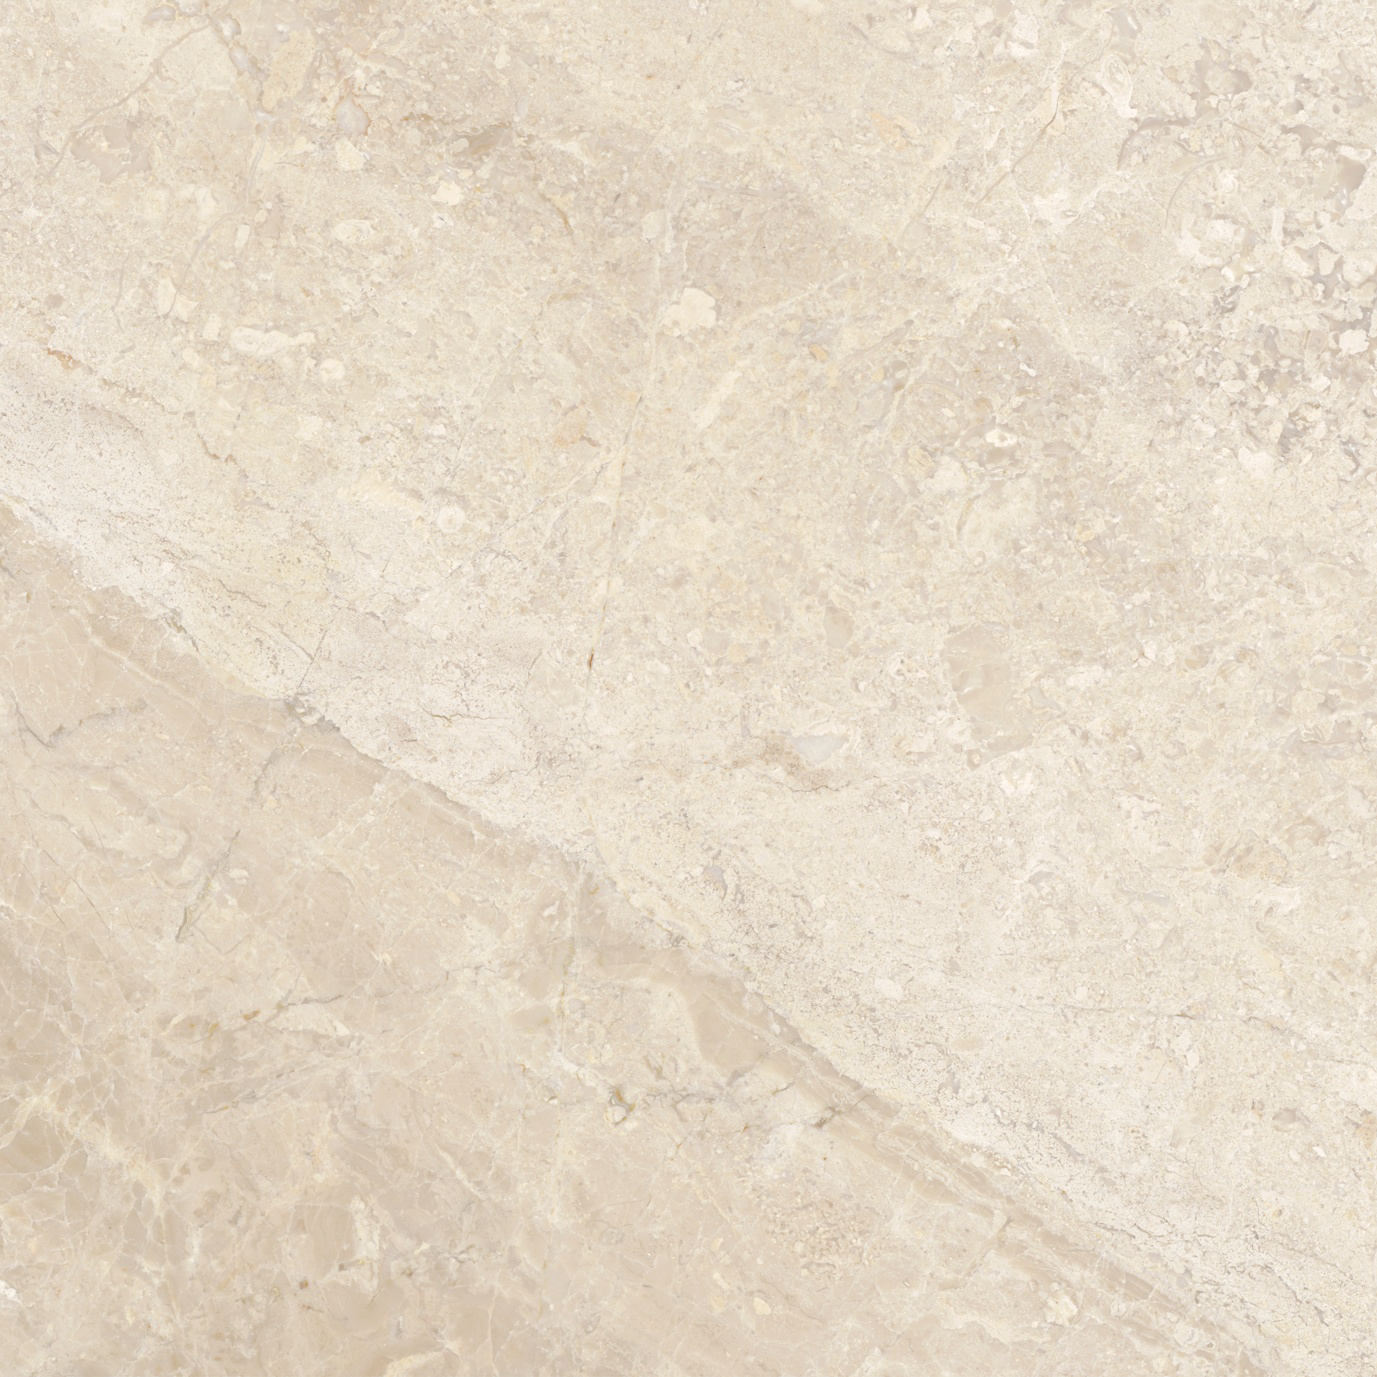 marble pattern natural stone field tile from impero reale anatolia collection distributed by surface group international polished finish straight edge edge 12x12 square shape